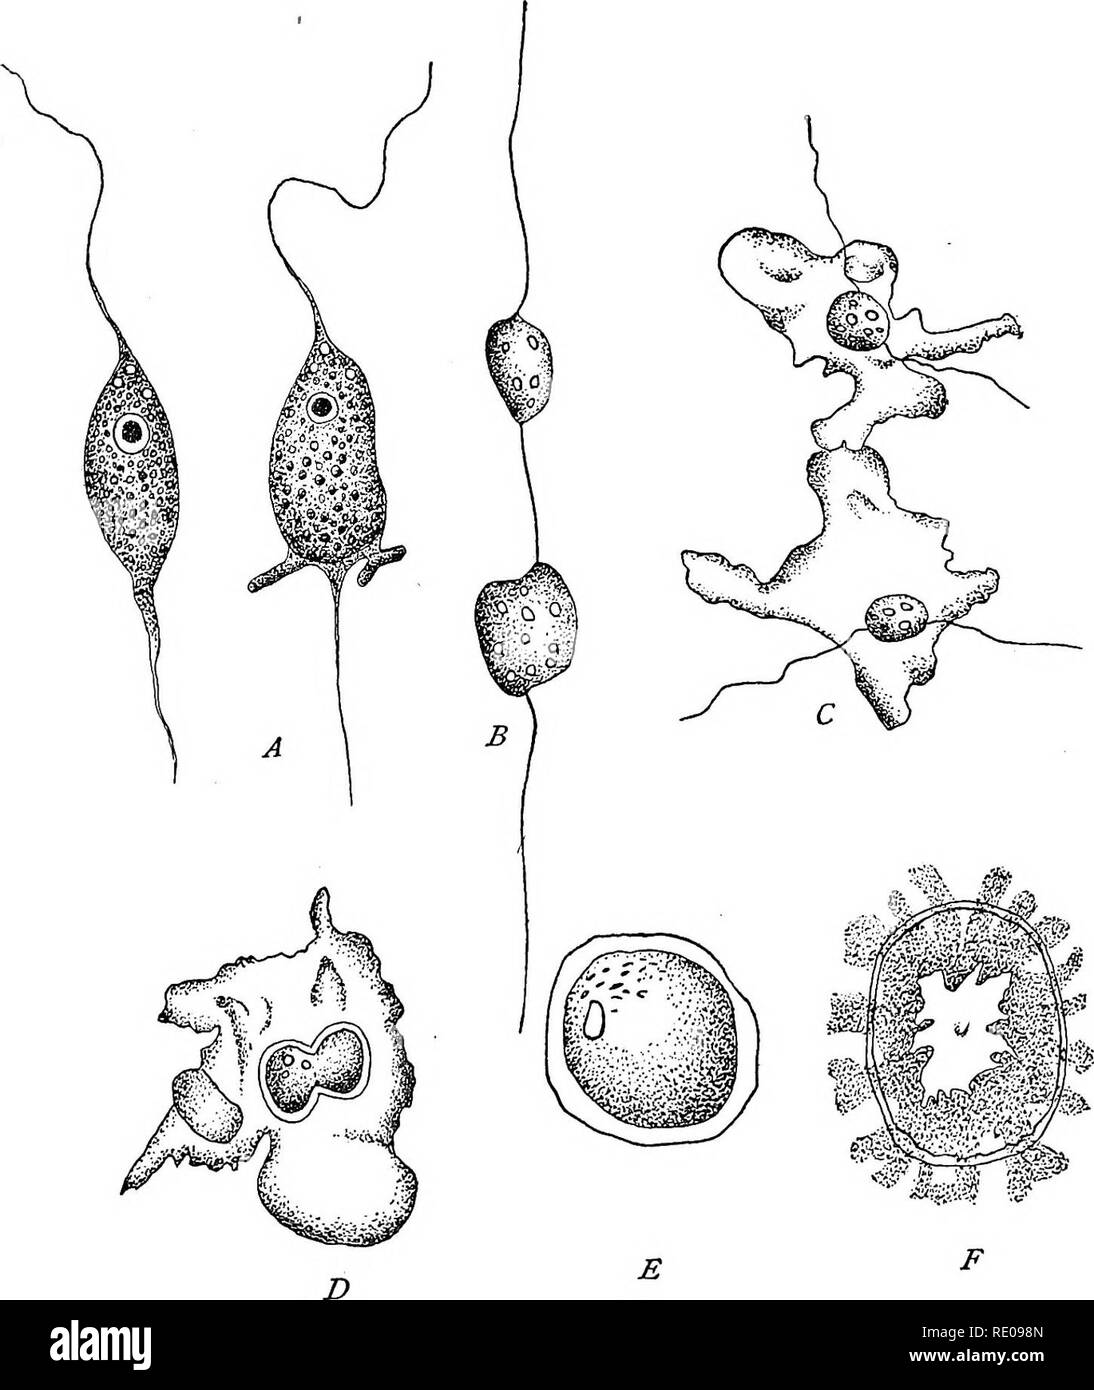 . The Protozoa. Protozoa. THE MASTIGOPHORA 133 Pringsheim regards the larger ones as females, while the smaller ones may be either male or female.. Fig. 75. — Cercomimas crasstcauda Duj. [Dallinger and Drysoale.] A. Ordinary forms. B. Division stage. C. Conjugation of two individuals in amoeboid con- dition. D-E. The copula. F. Sporulation. The fused mass (zygospore) encysts and dries, the color changing from green to red. When remoistened, the contents again turn green and break open the cyst, usually as a single swarm-spore, although. Please note that these images are extracted from scanned  Stock Photo